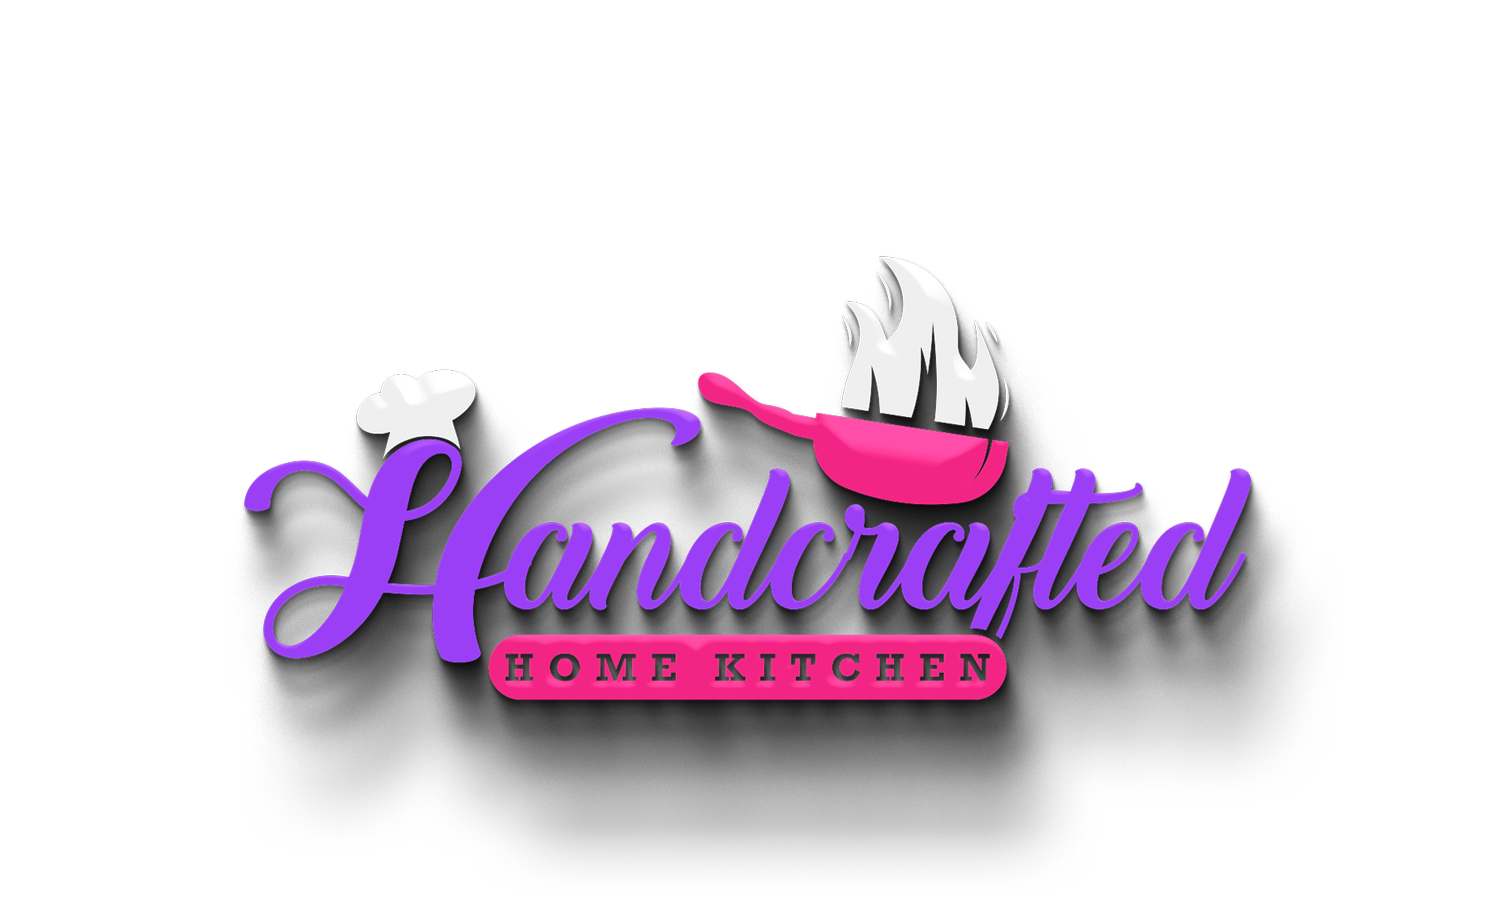 Handcrafted Home Kitchen